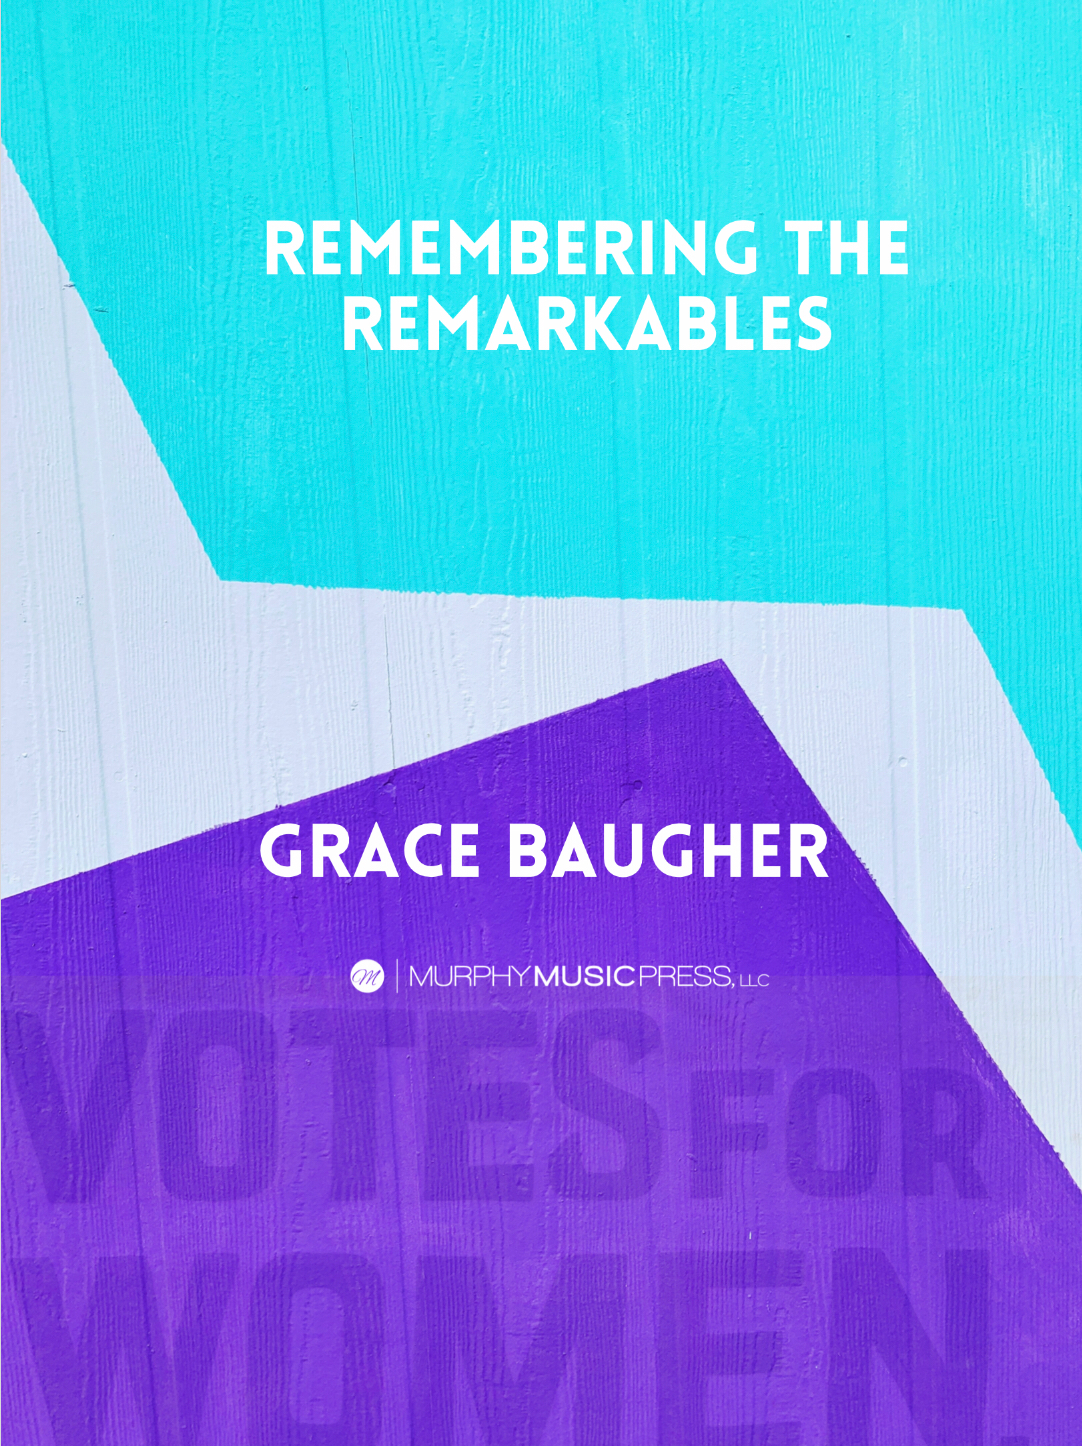 Remembering The Remarkables by Grace Baugher